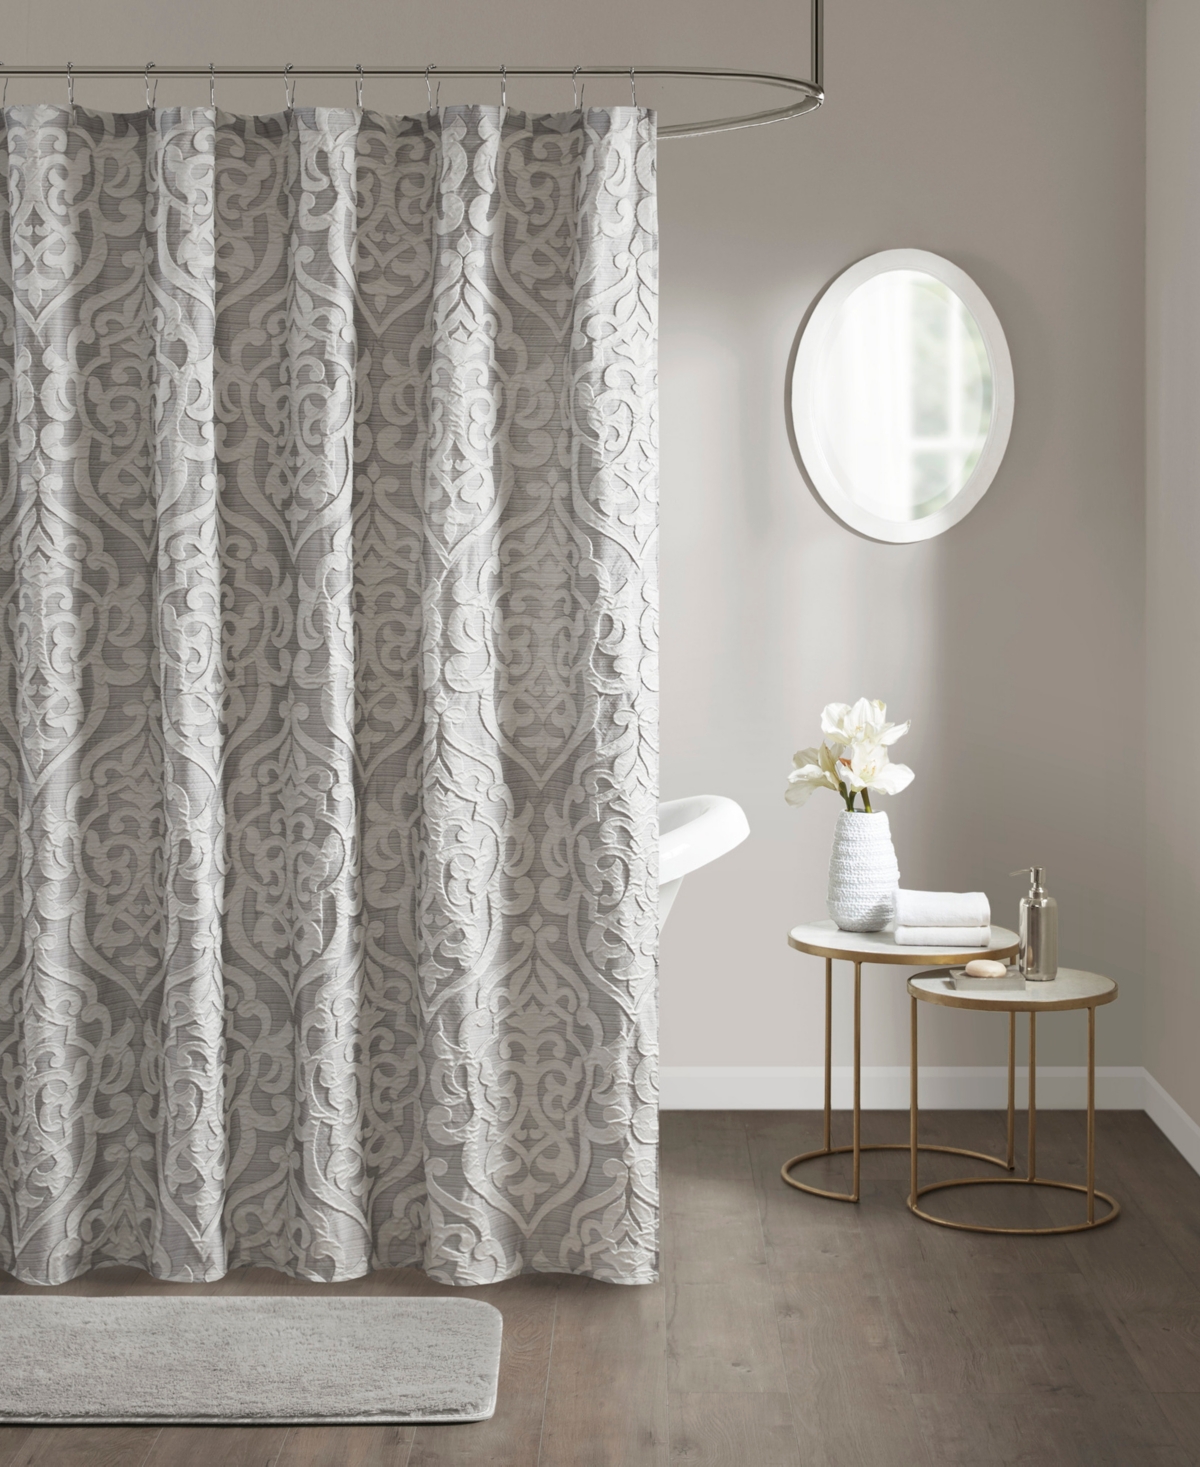 Ink+ivy Odette Jacquard Shower Curtain, 72" X 72" In Tan